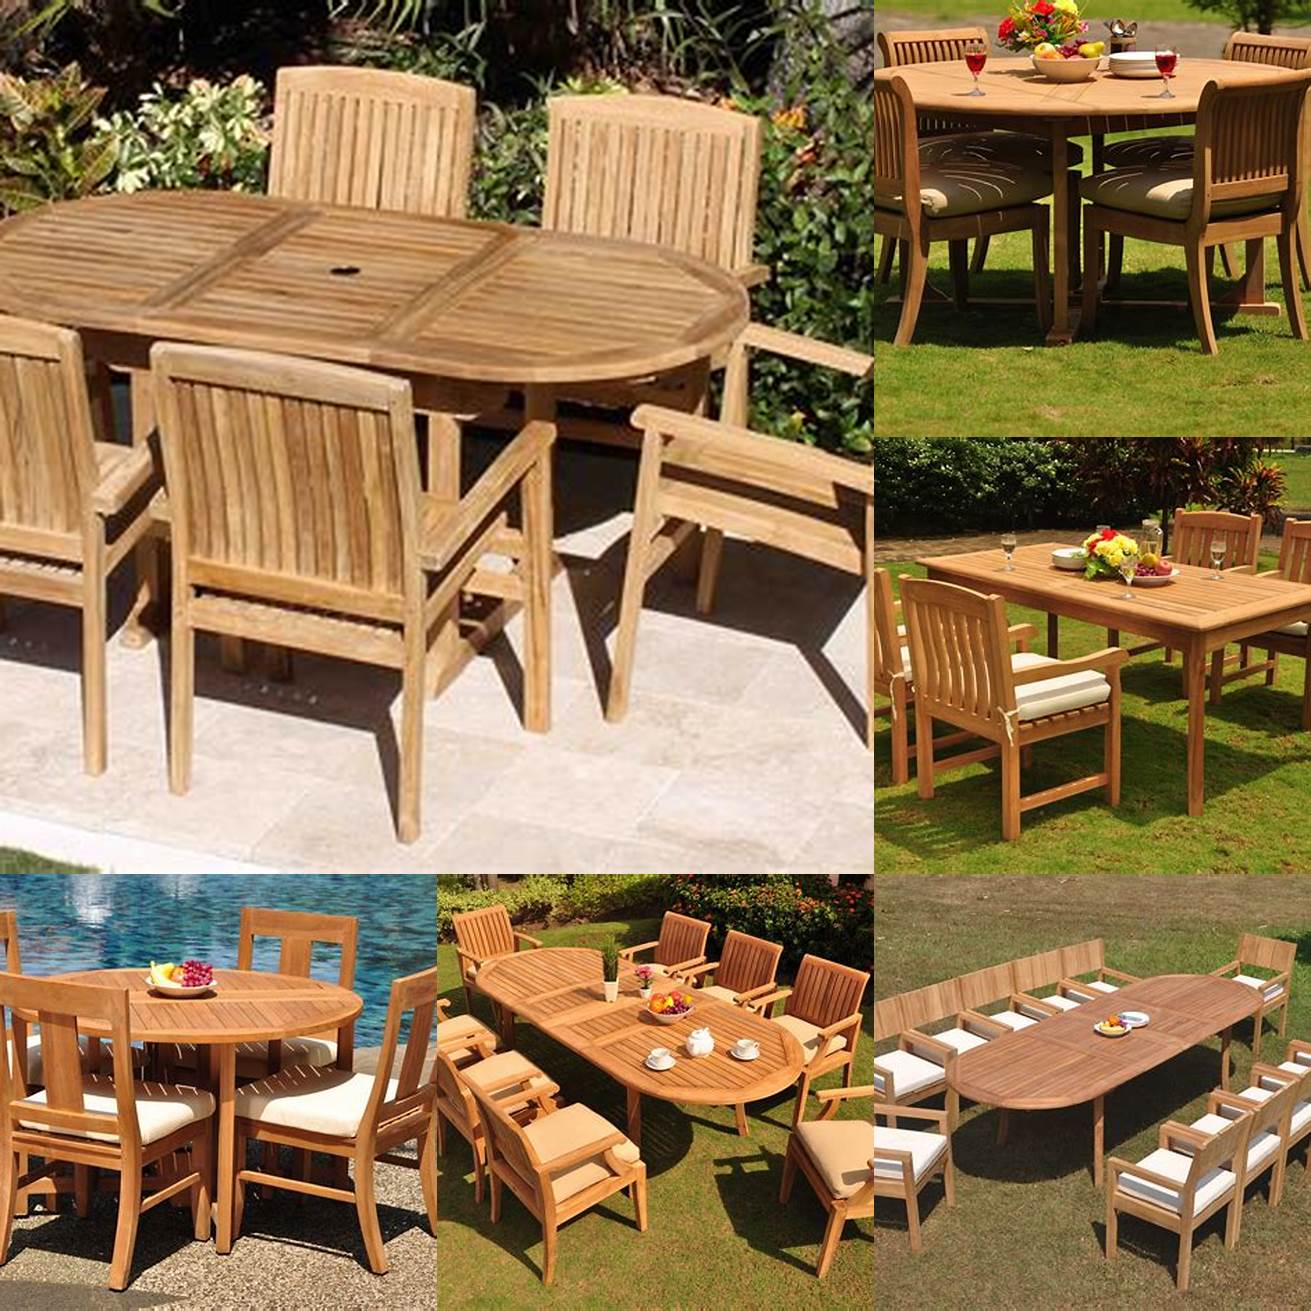 An image of a teak table and chairs in a variety of settings